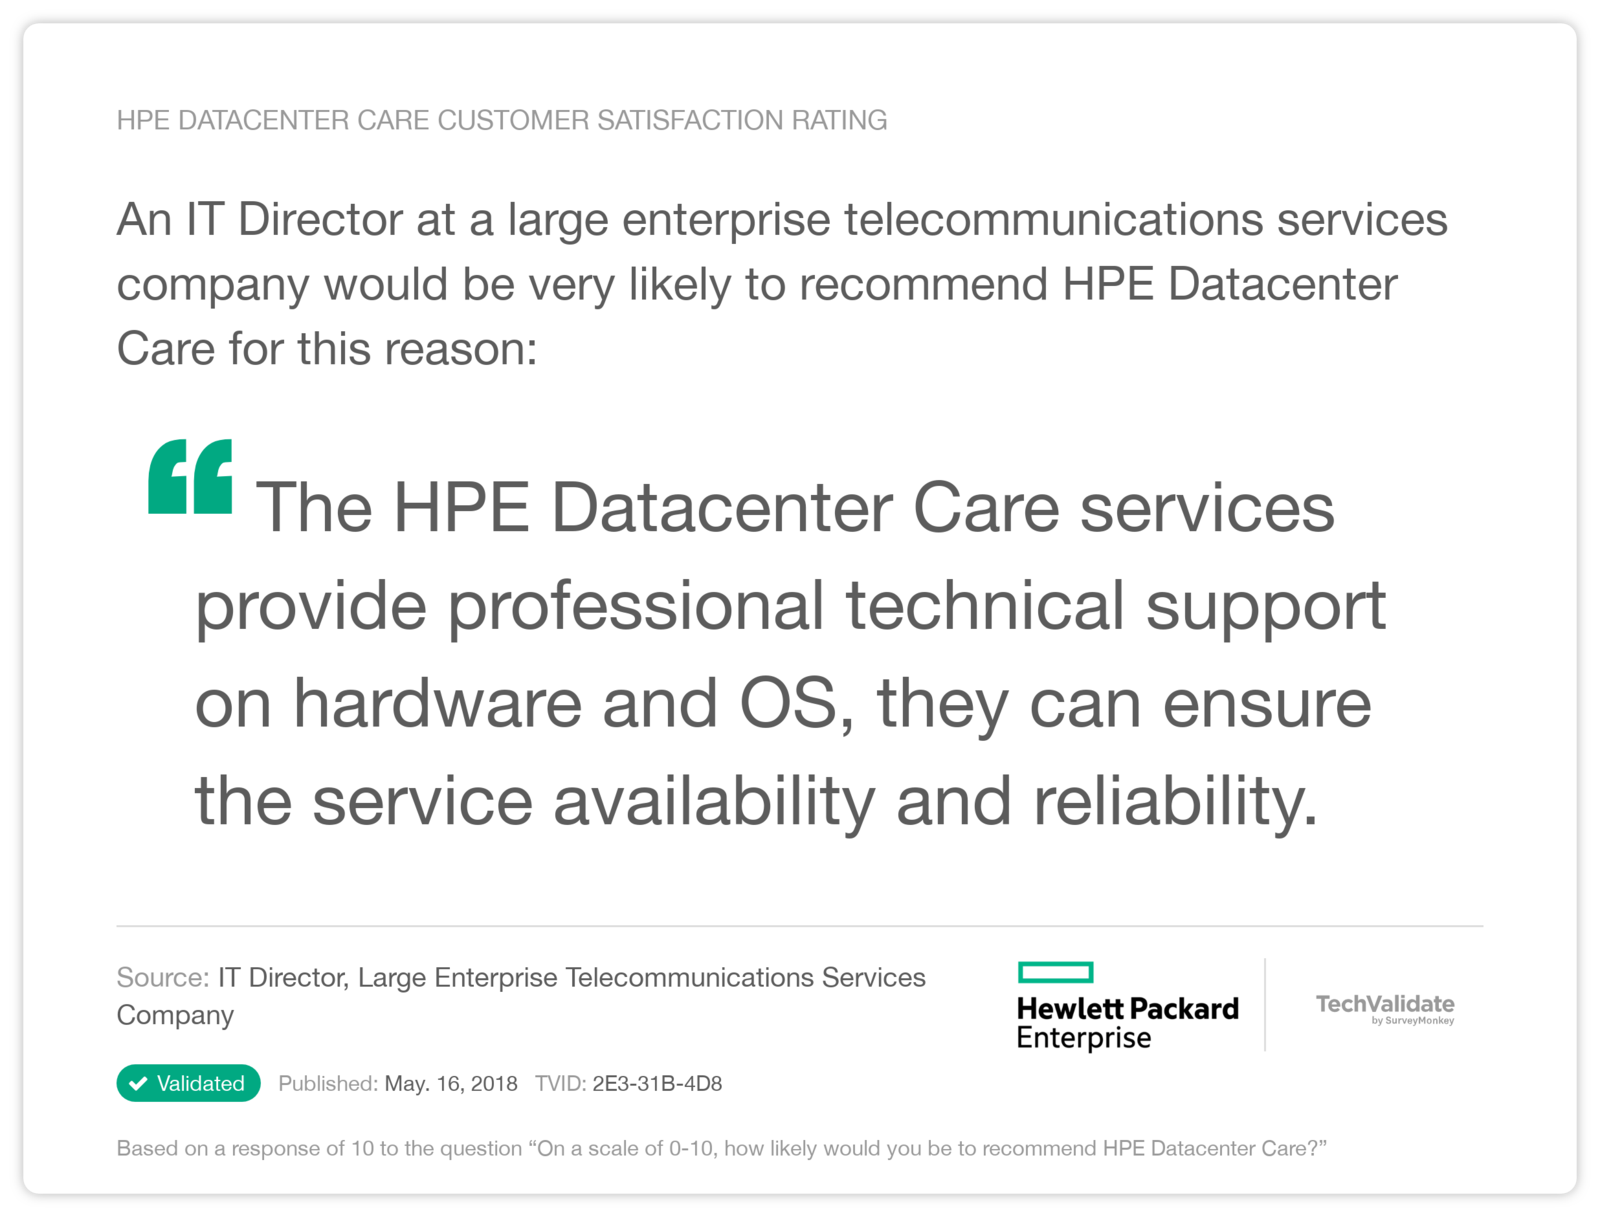 HPE Datacenter Care Customer Satisfaction Rating